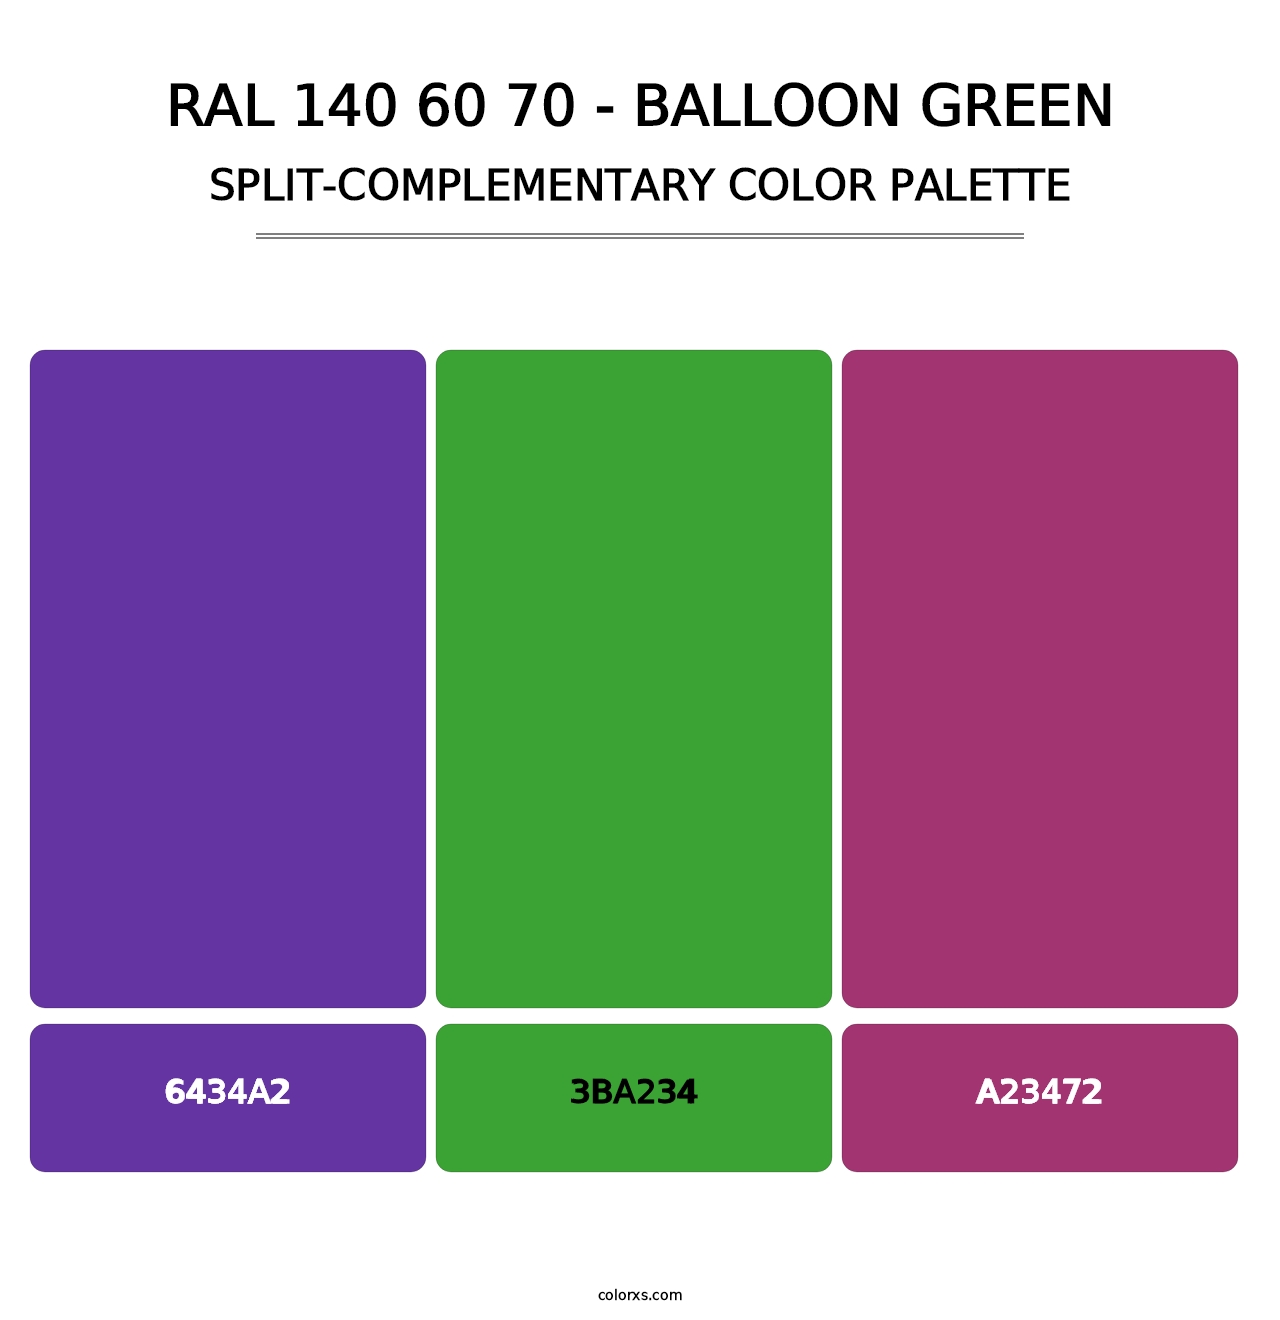 RAL 140 60 70 - Balloon Green - Split-Complementary Color Palette